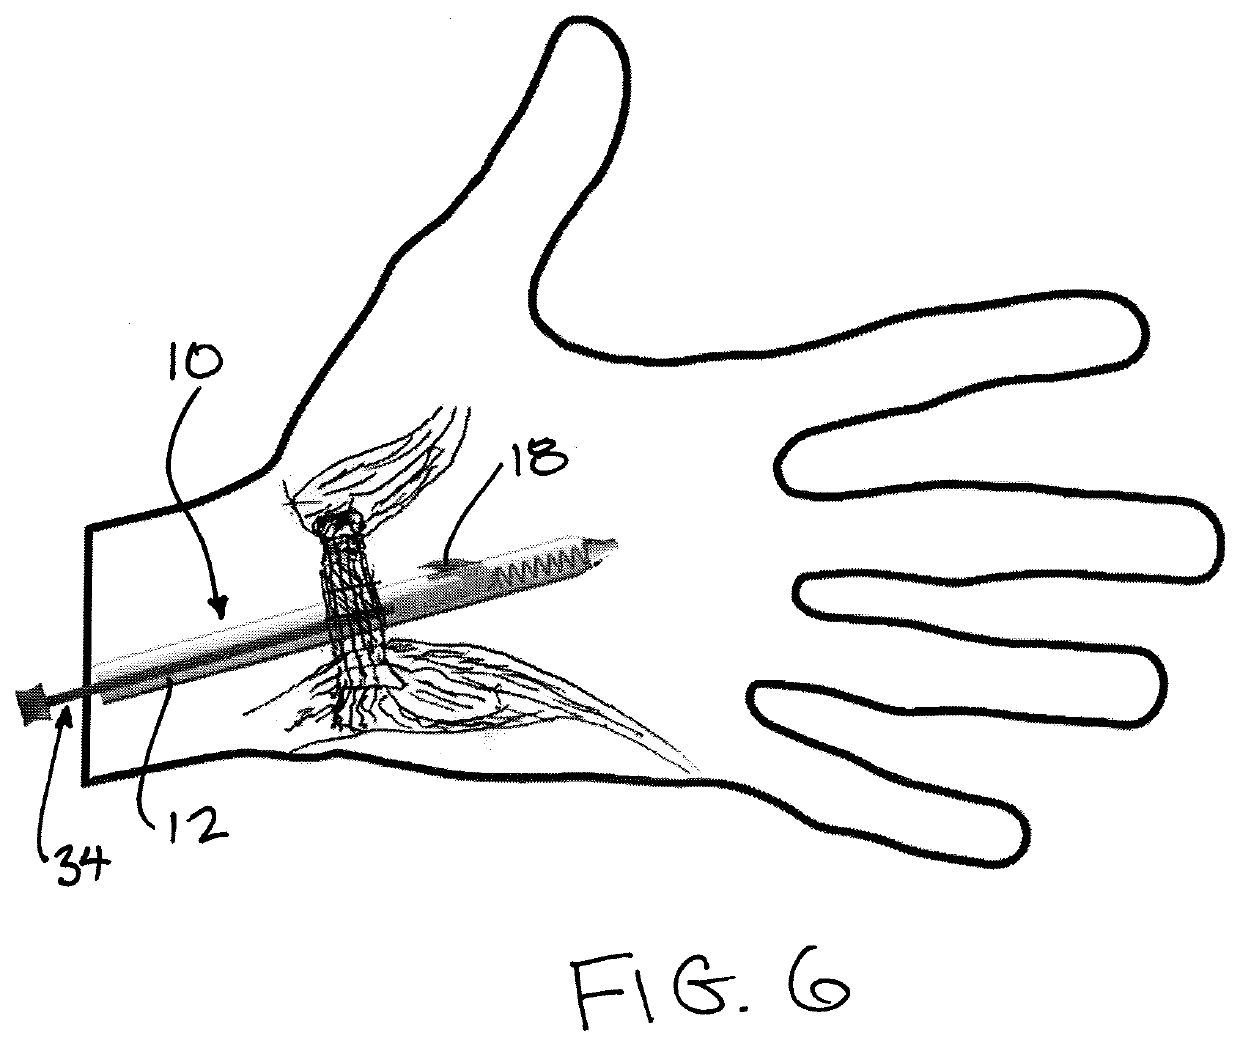 Surgical tool and method of use for carpel tunnel release procedure